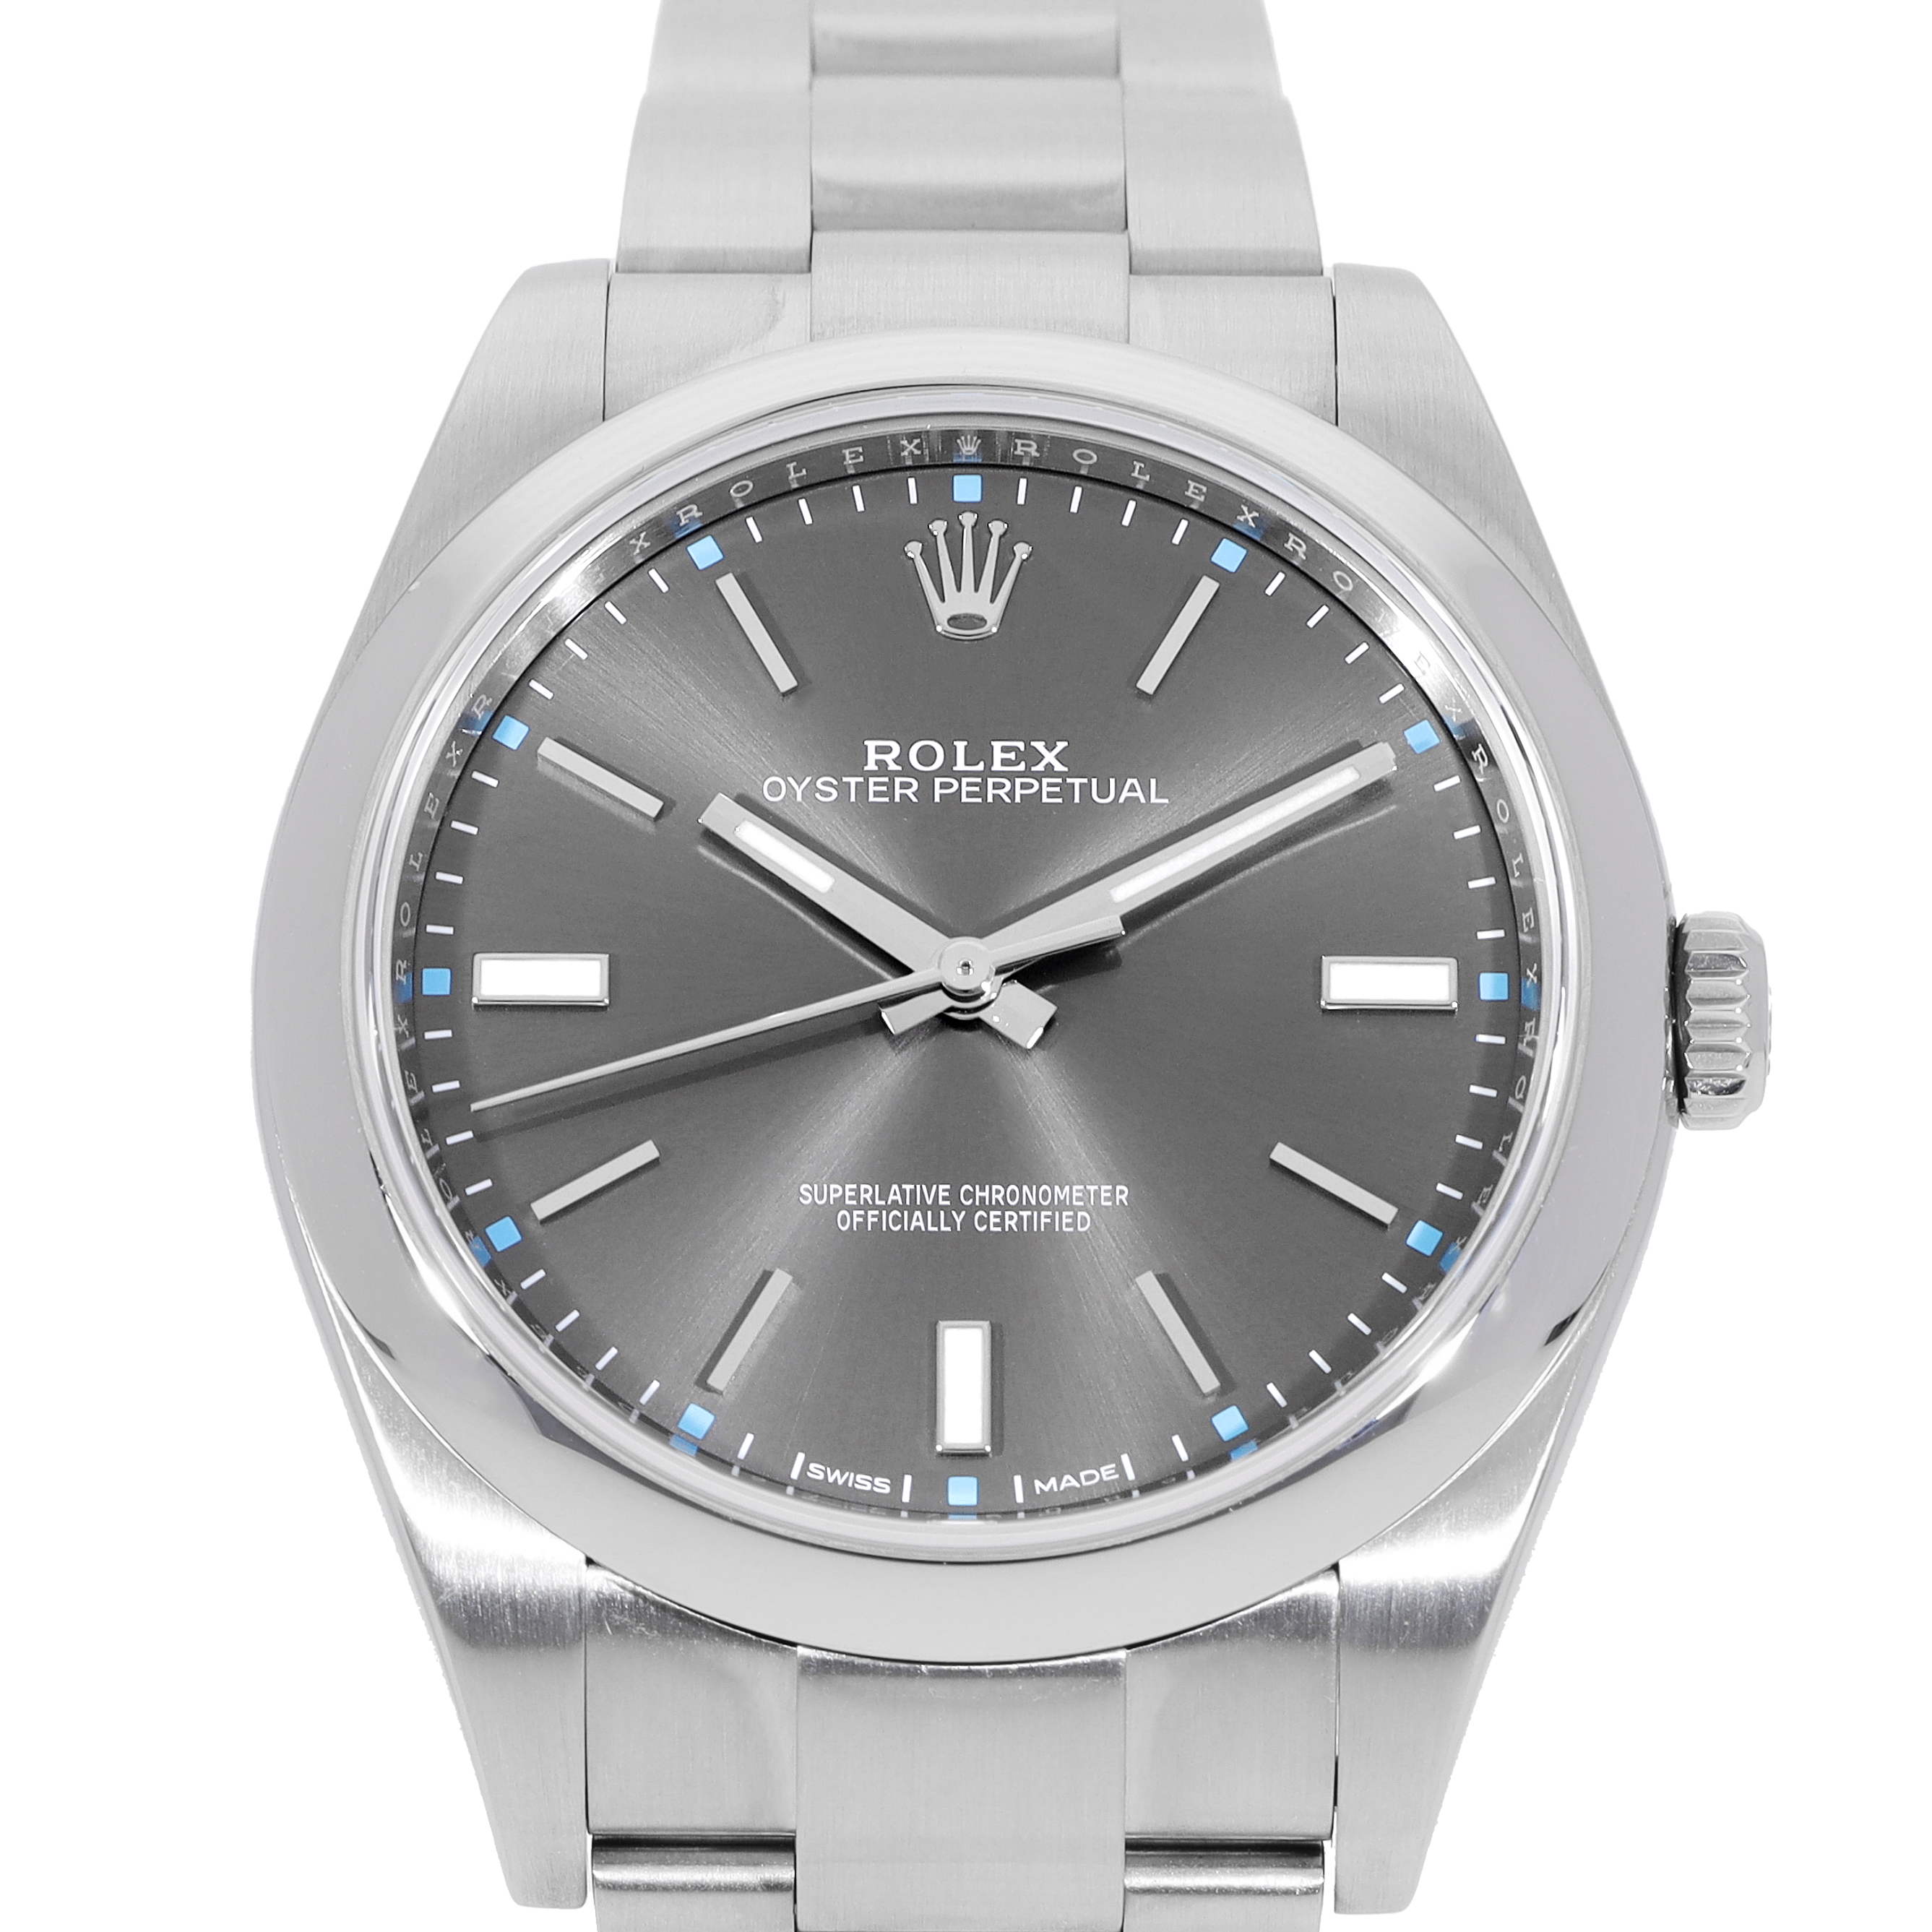 Rolex Oyster Perpetual 114300 in Stainless Steel |